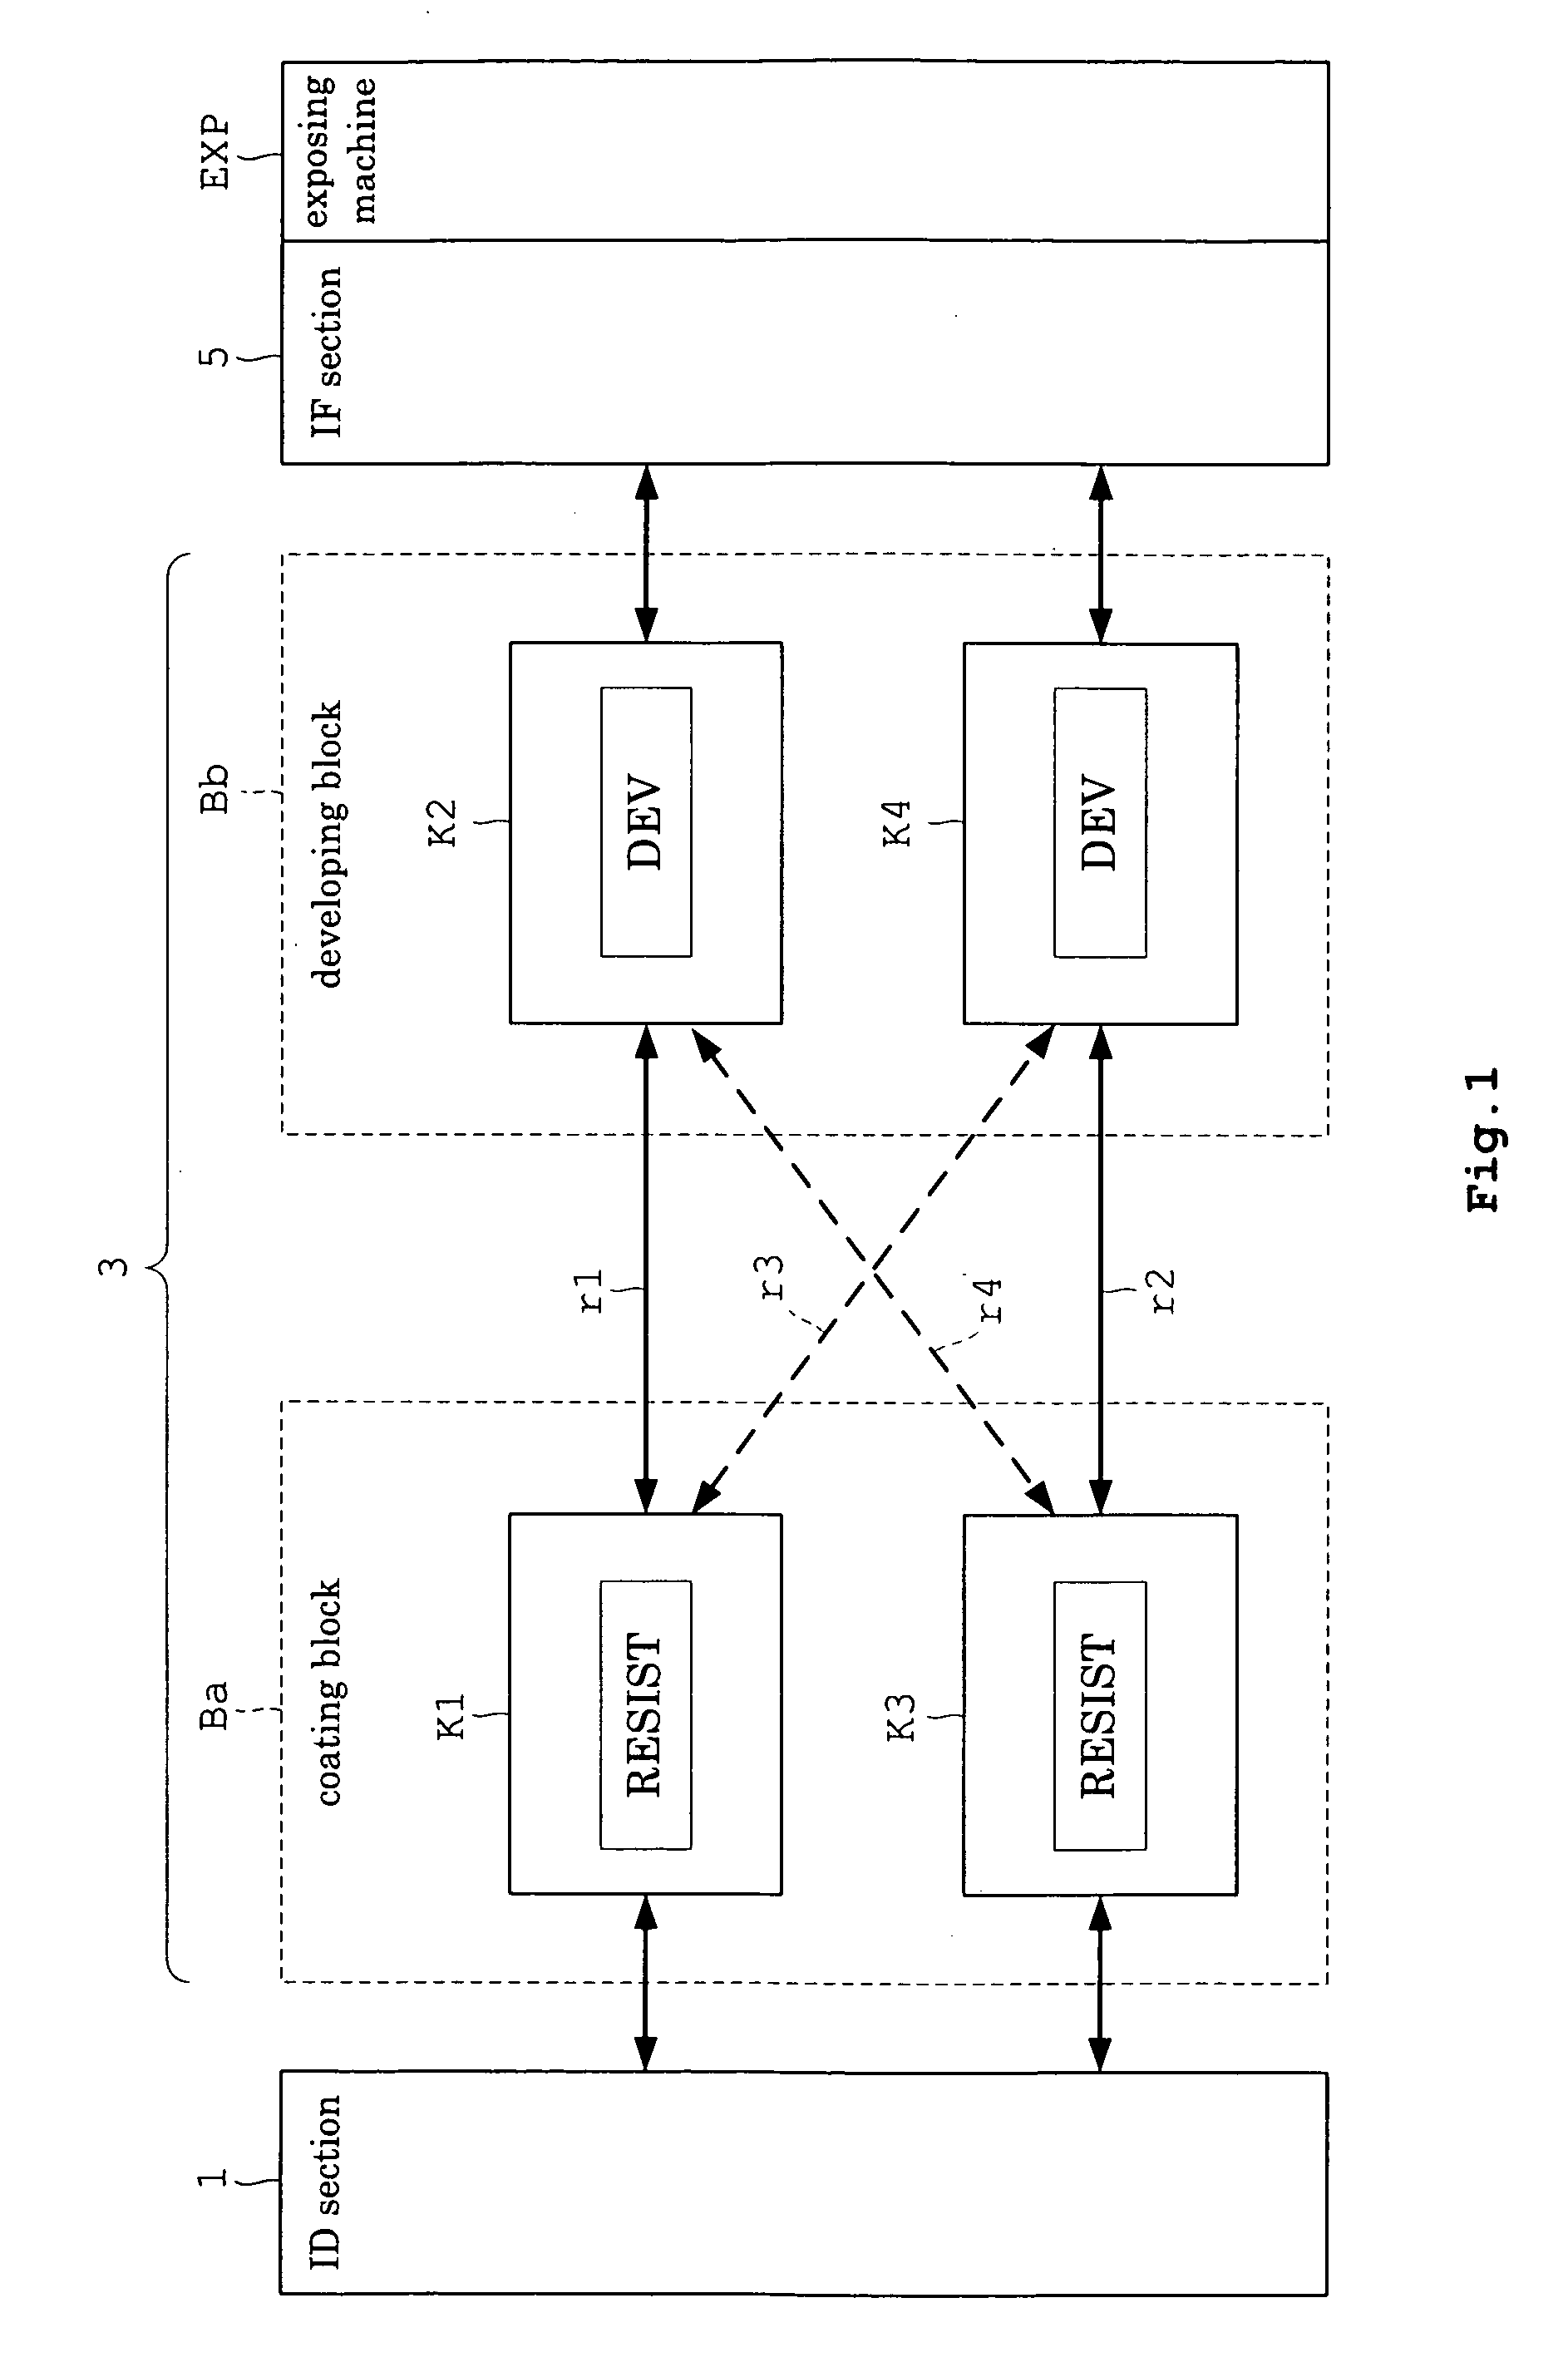 Multi-story substrate treating apparatus with flexible transport mechanisms